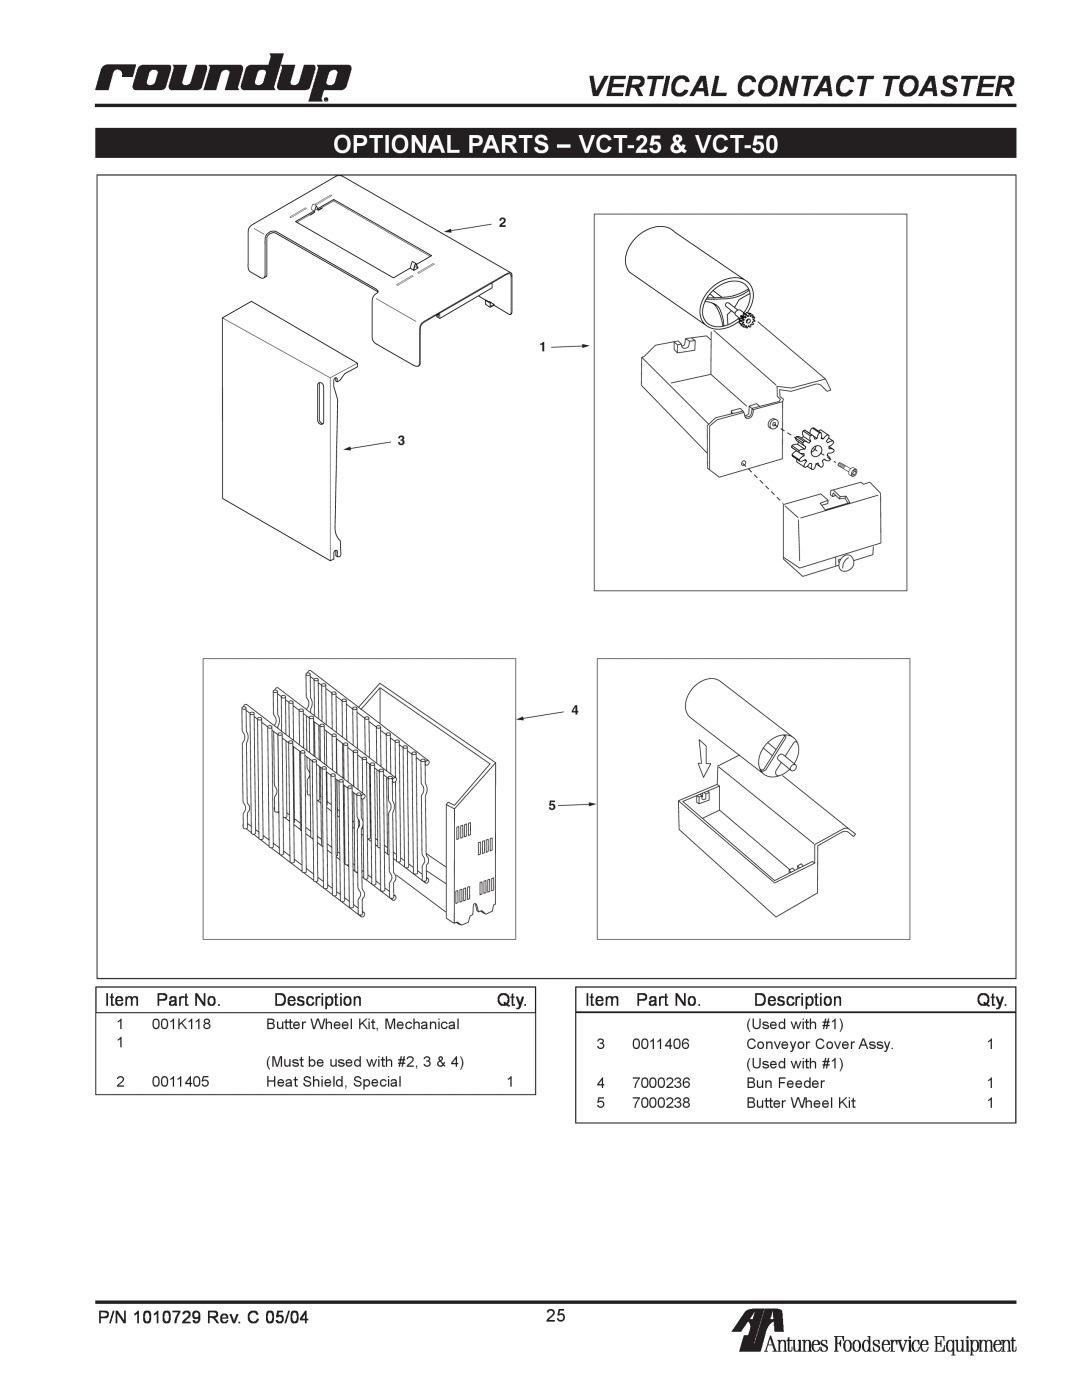 Antunes, AJ VCT-20 owner manual Vertical Contact Toaster, OPTIONAL PARTS - VCT-25 & VCT-50 